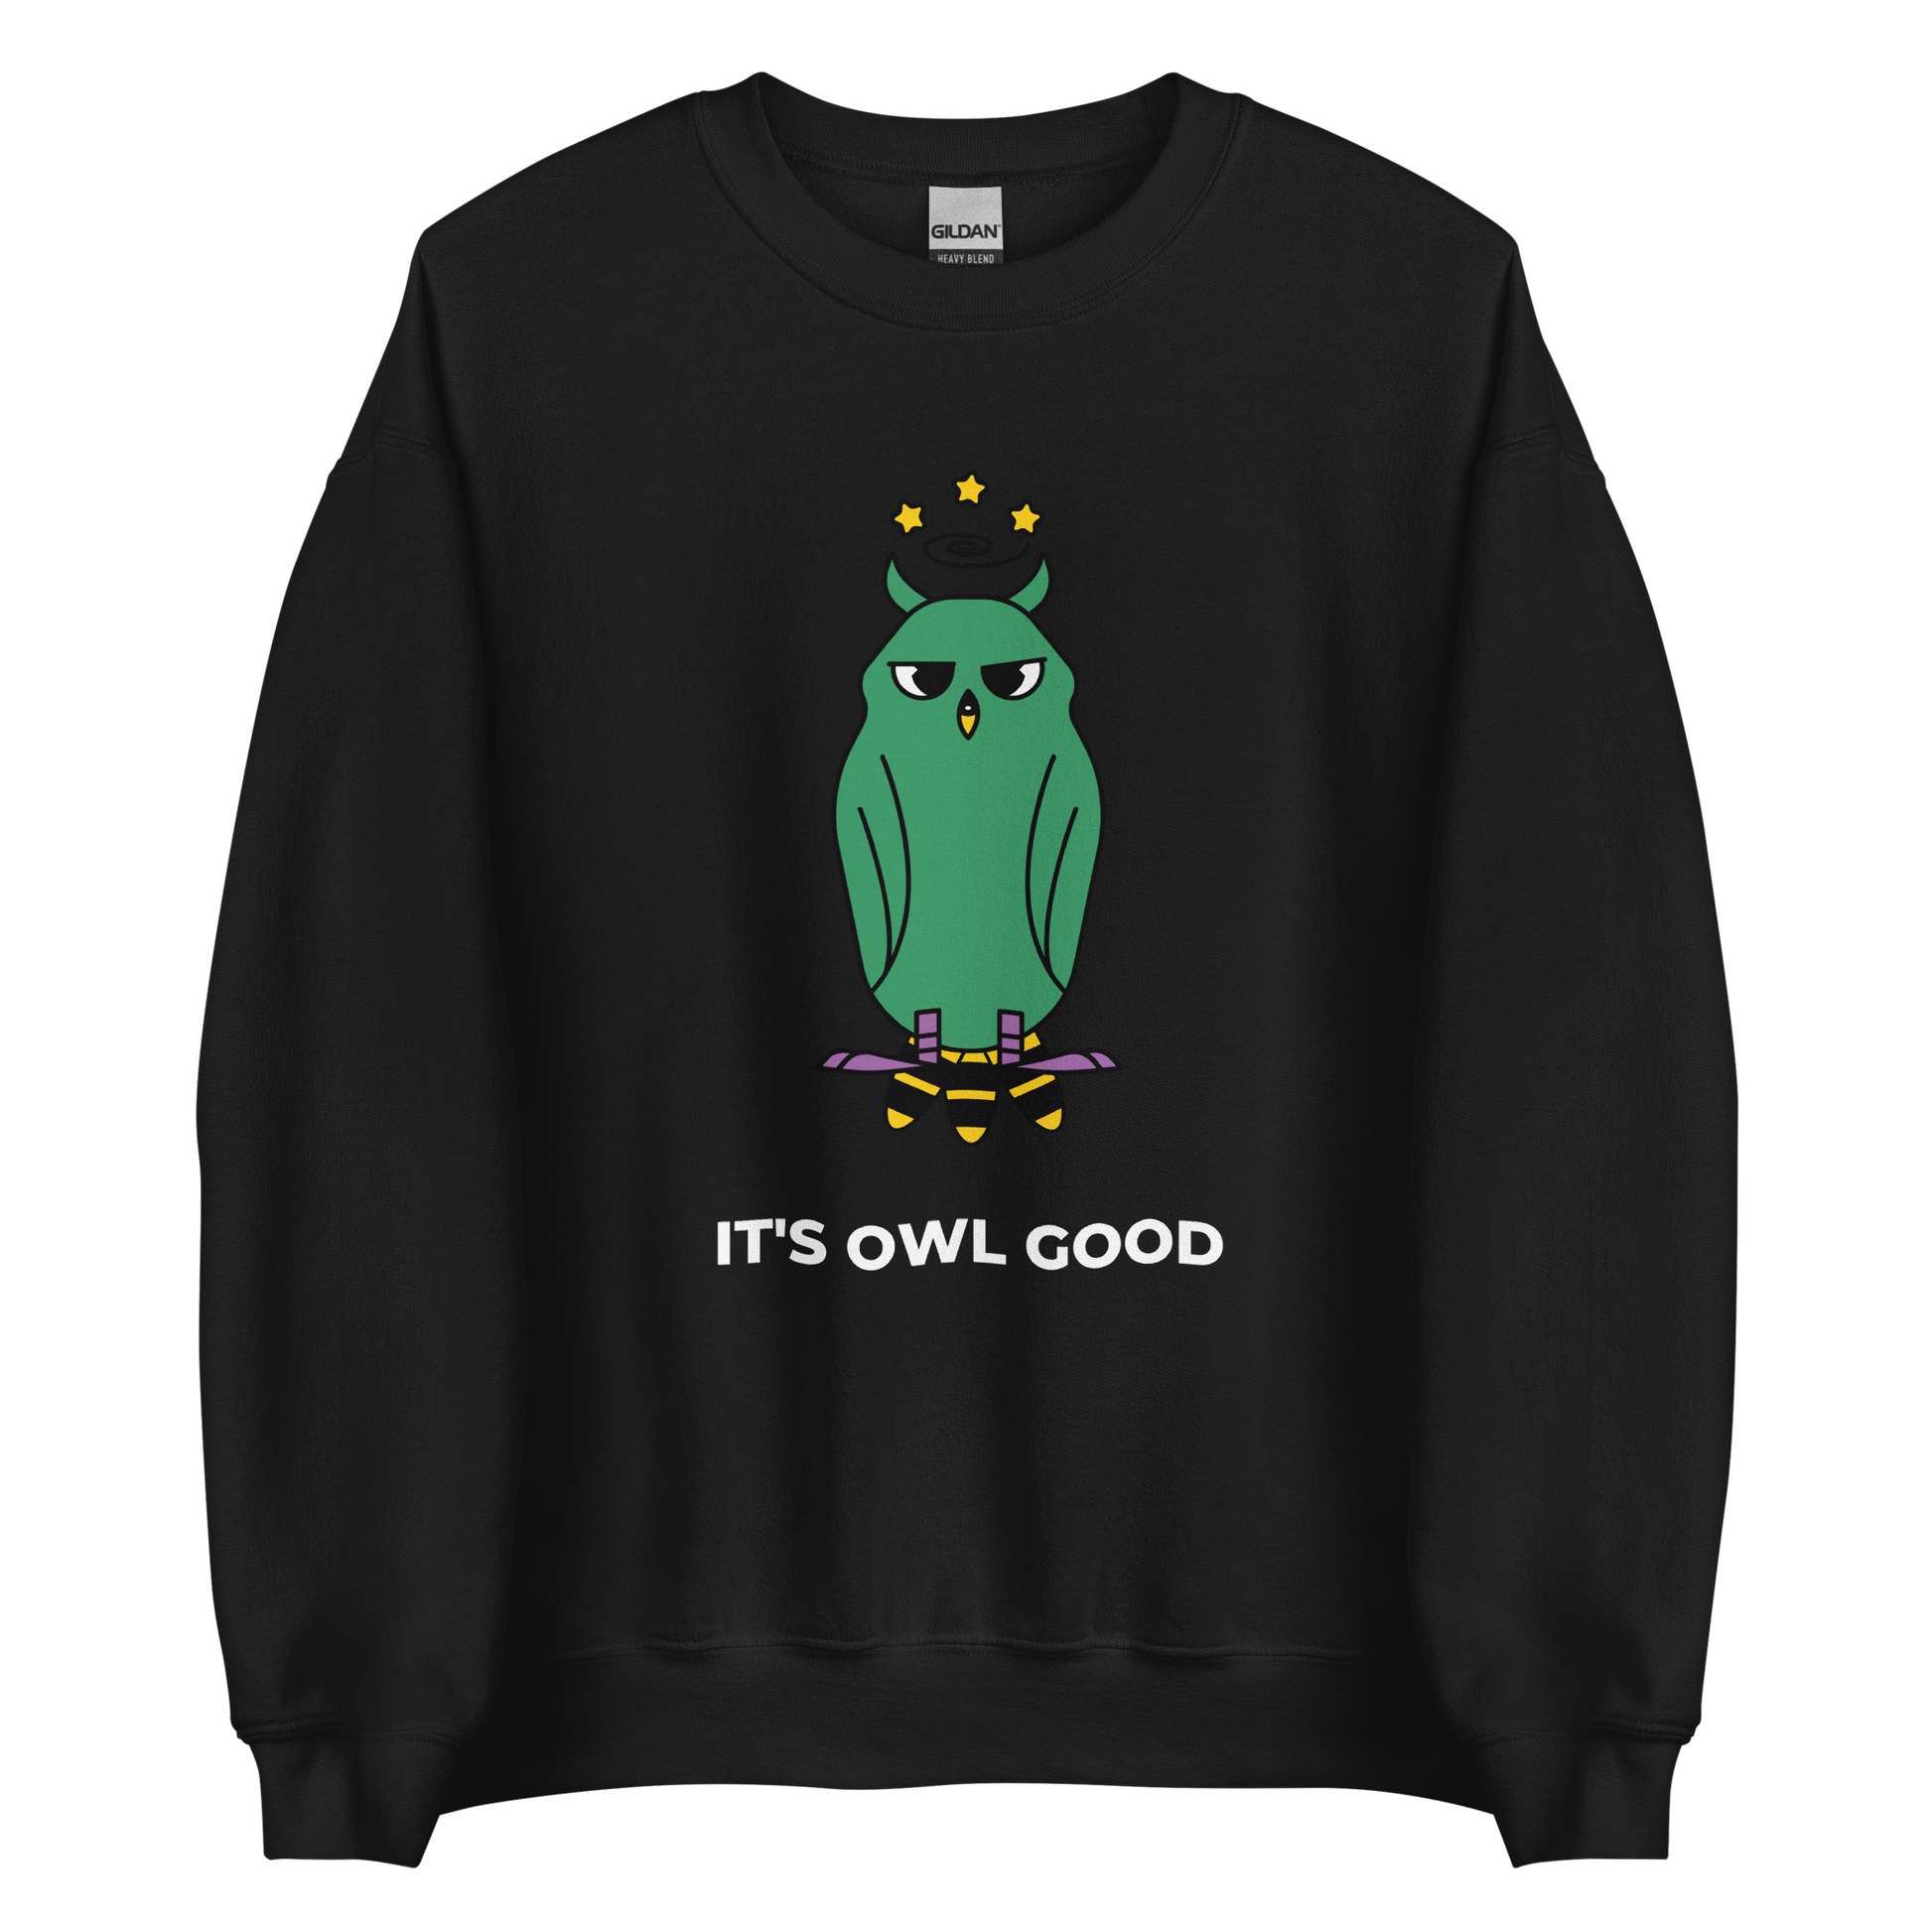 Black Owl Sweatshirt featuring a captivating It's Owl Good graphic on the chest - Funny Graphic Owl Sweatshirts - Boozy Fox